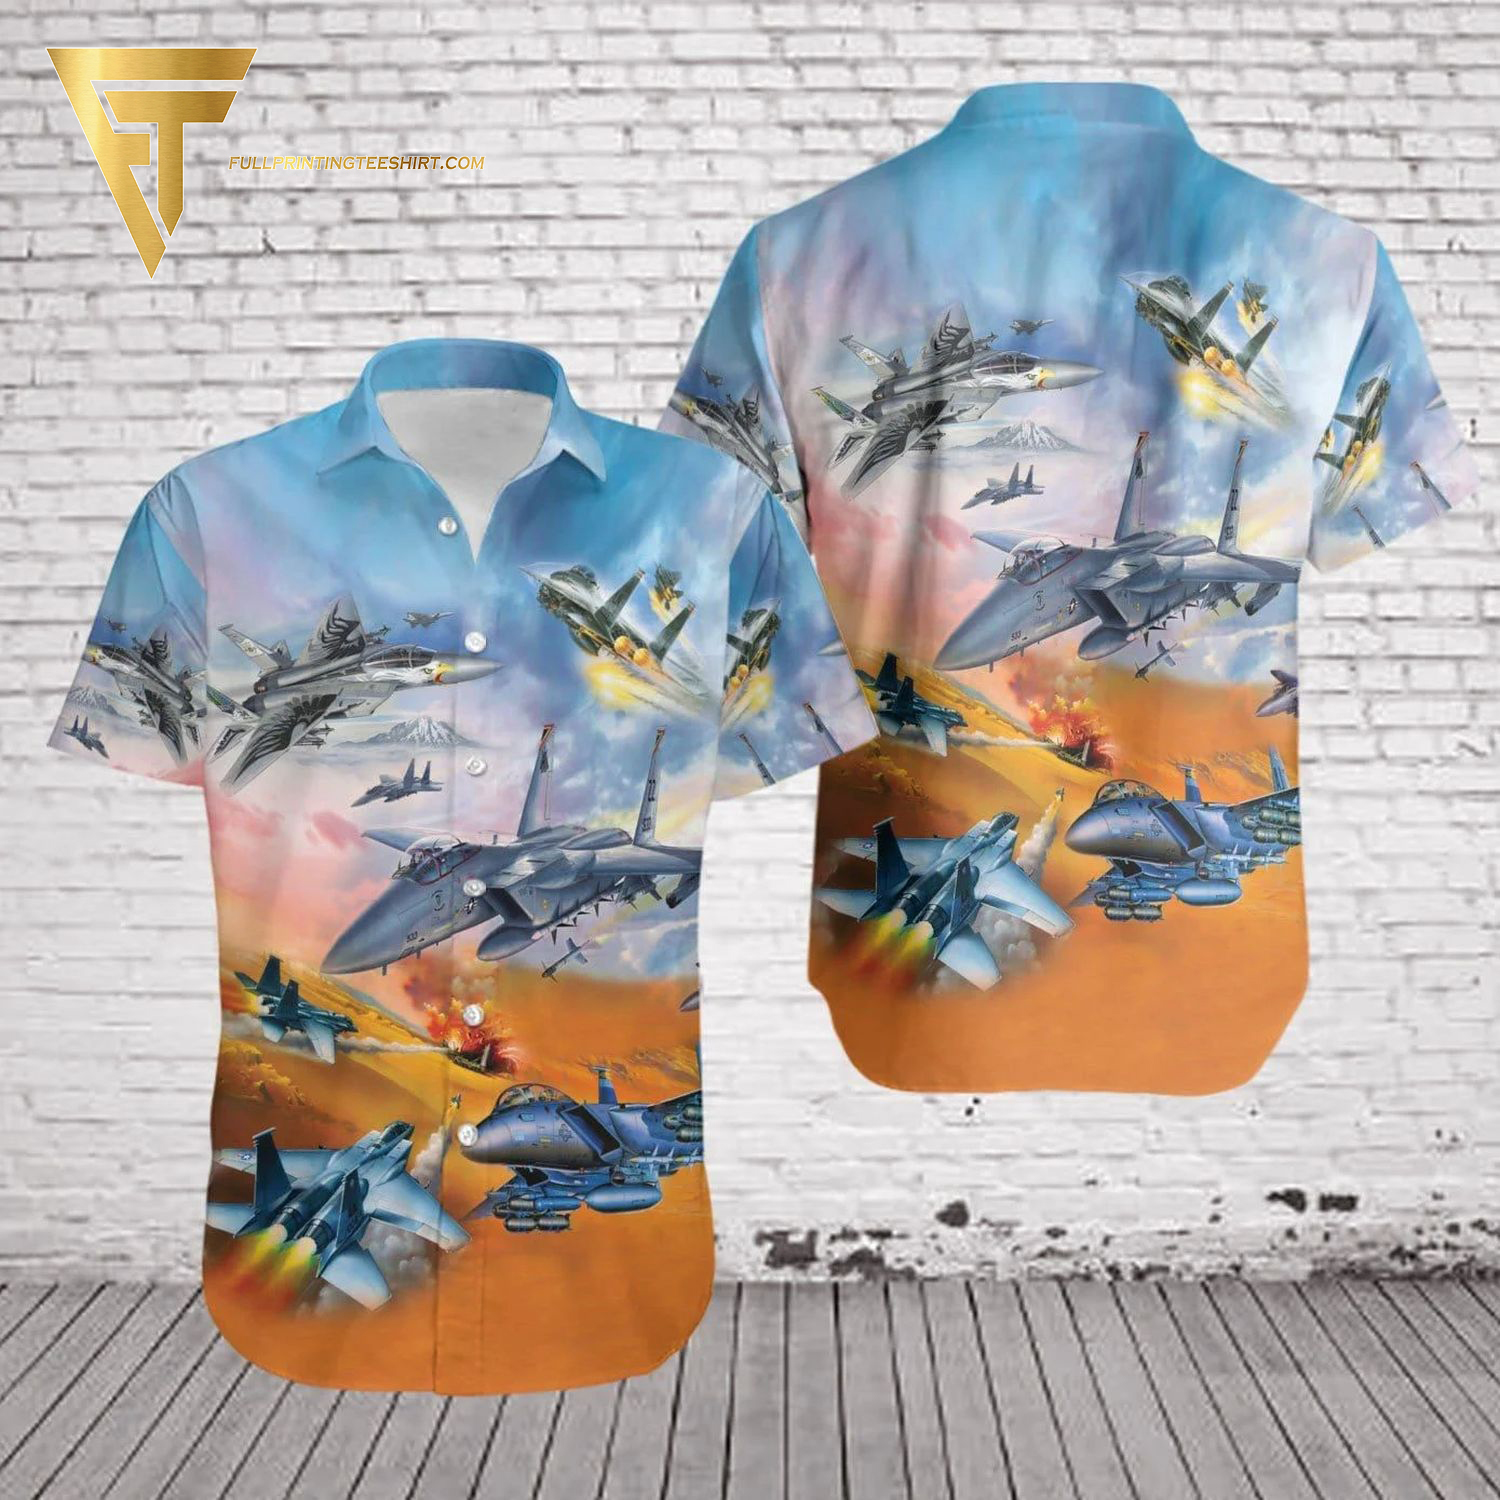 Majestic Machines and Fashion Fusion: Unraveling the McDonnell Douglas F-15 Eagle and the Iconic F-15 Hawaiian Shirt